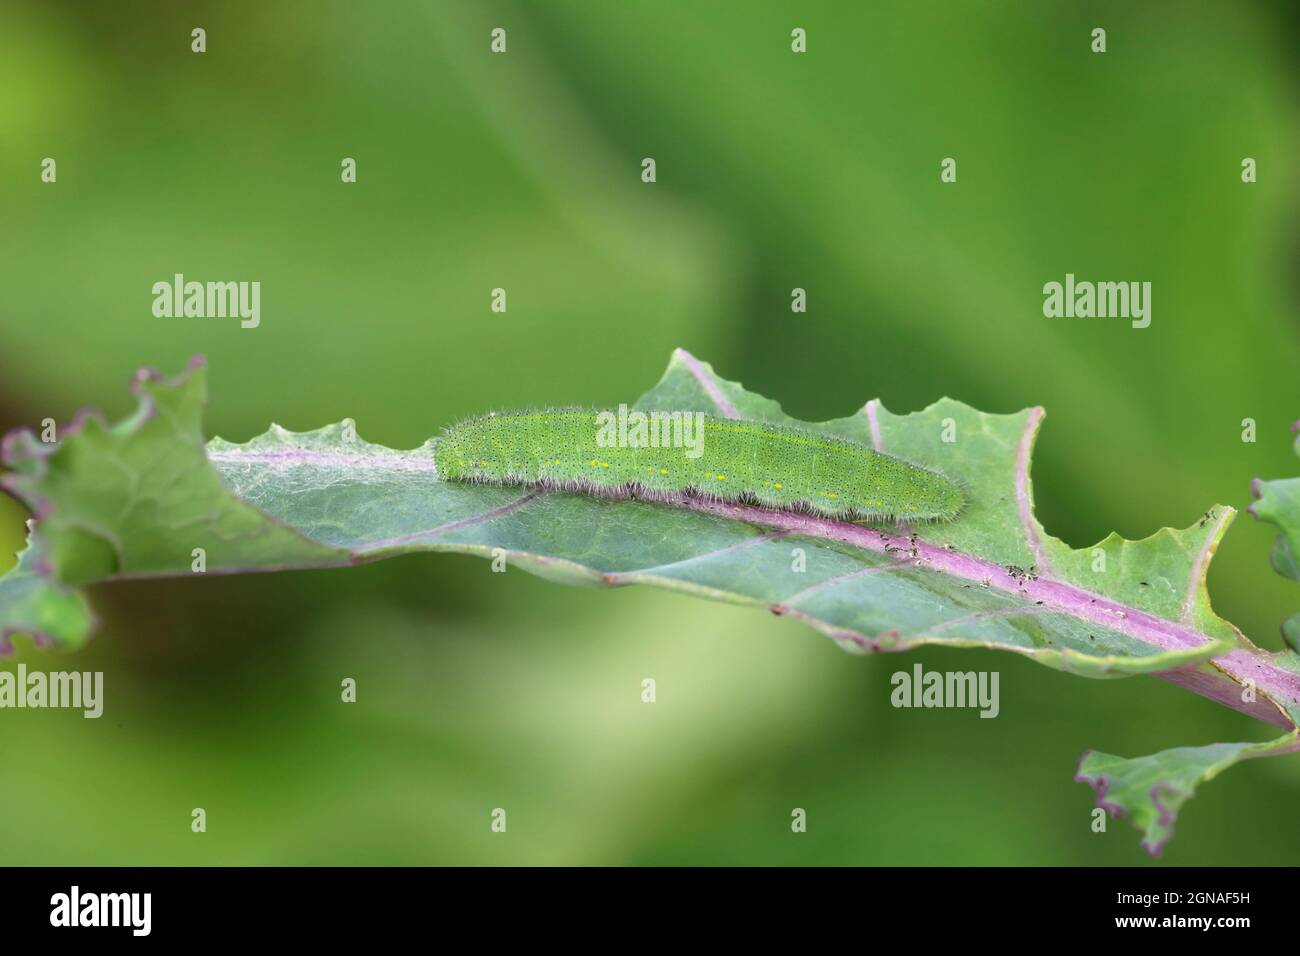 Caterpillar of Pieris rapae called cabbage white, cabbage butterfly or small white on the palm. Stock Photo